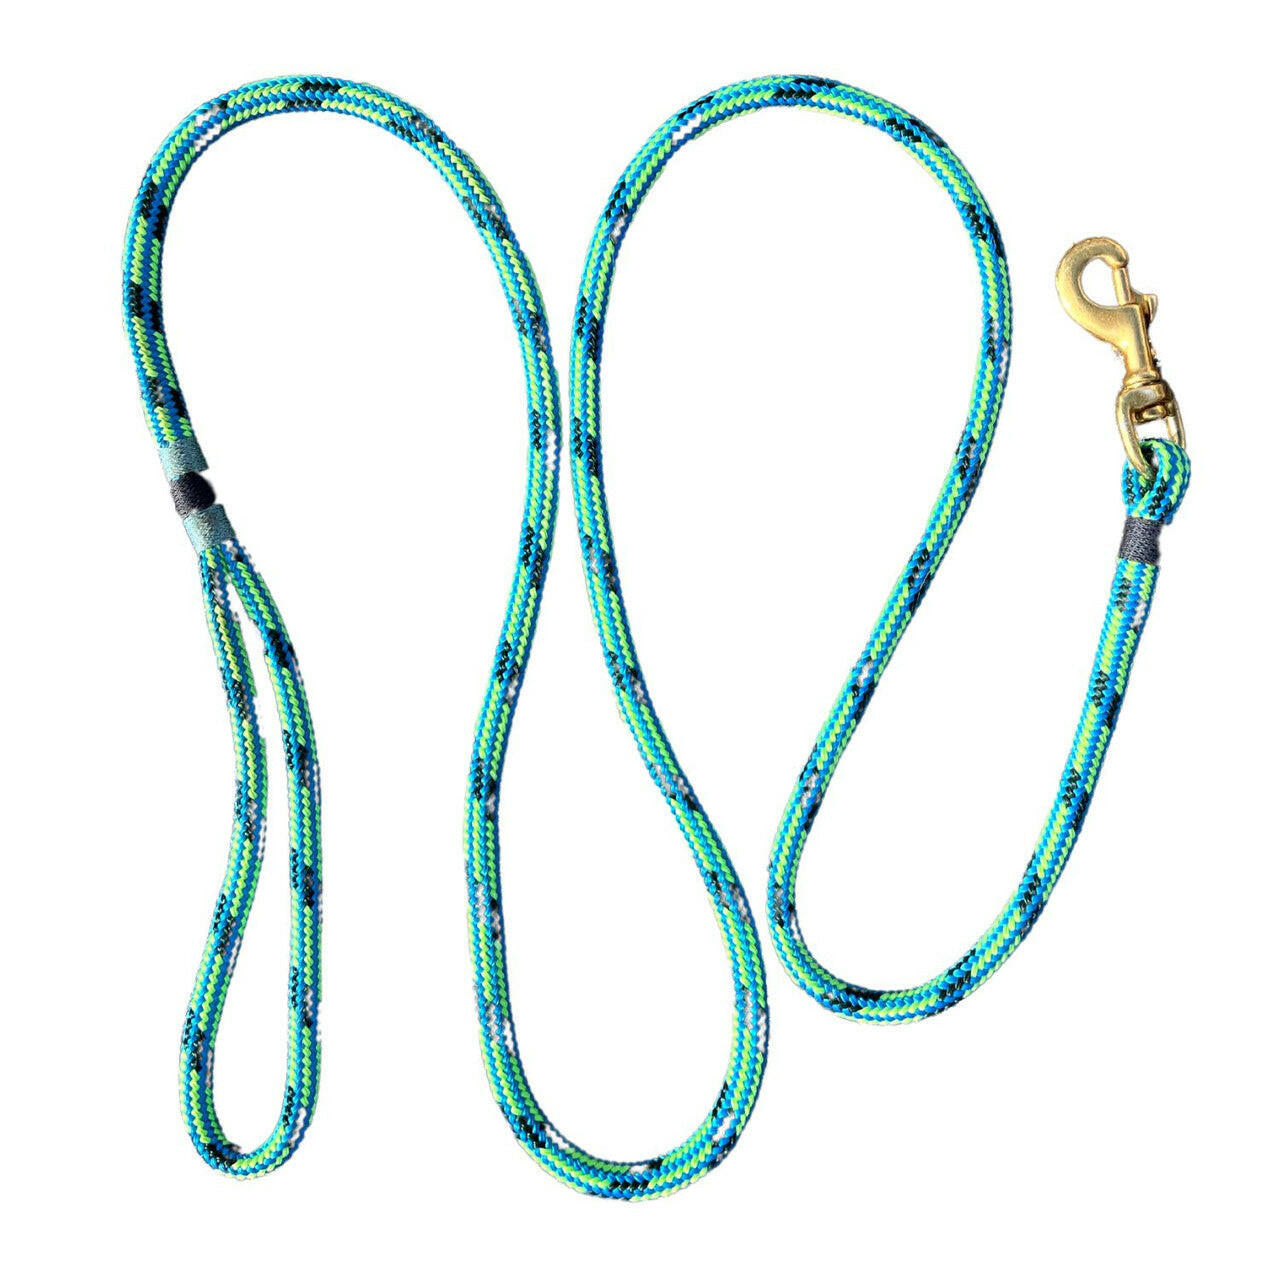 Nautical Rope Dog Leash, Authentic Yacht Braid Pet Leashes New England Trading Co Multi-Green  